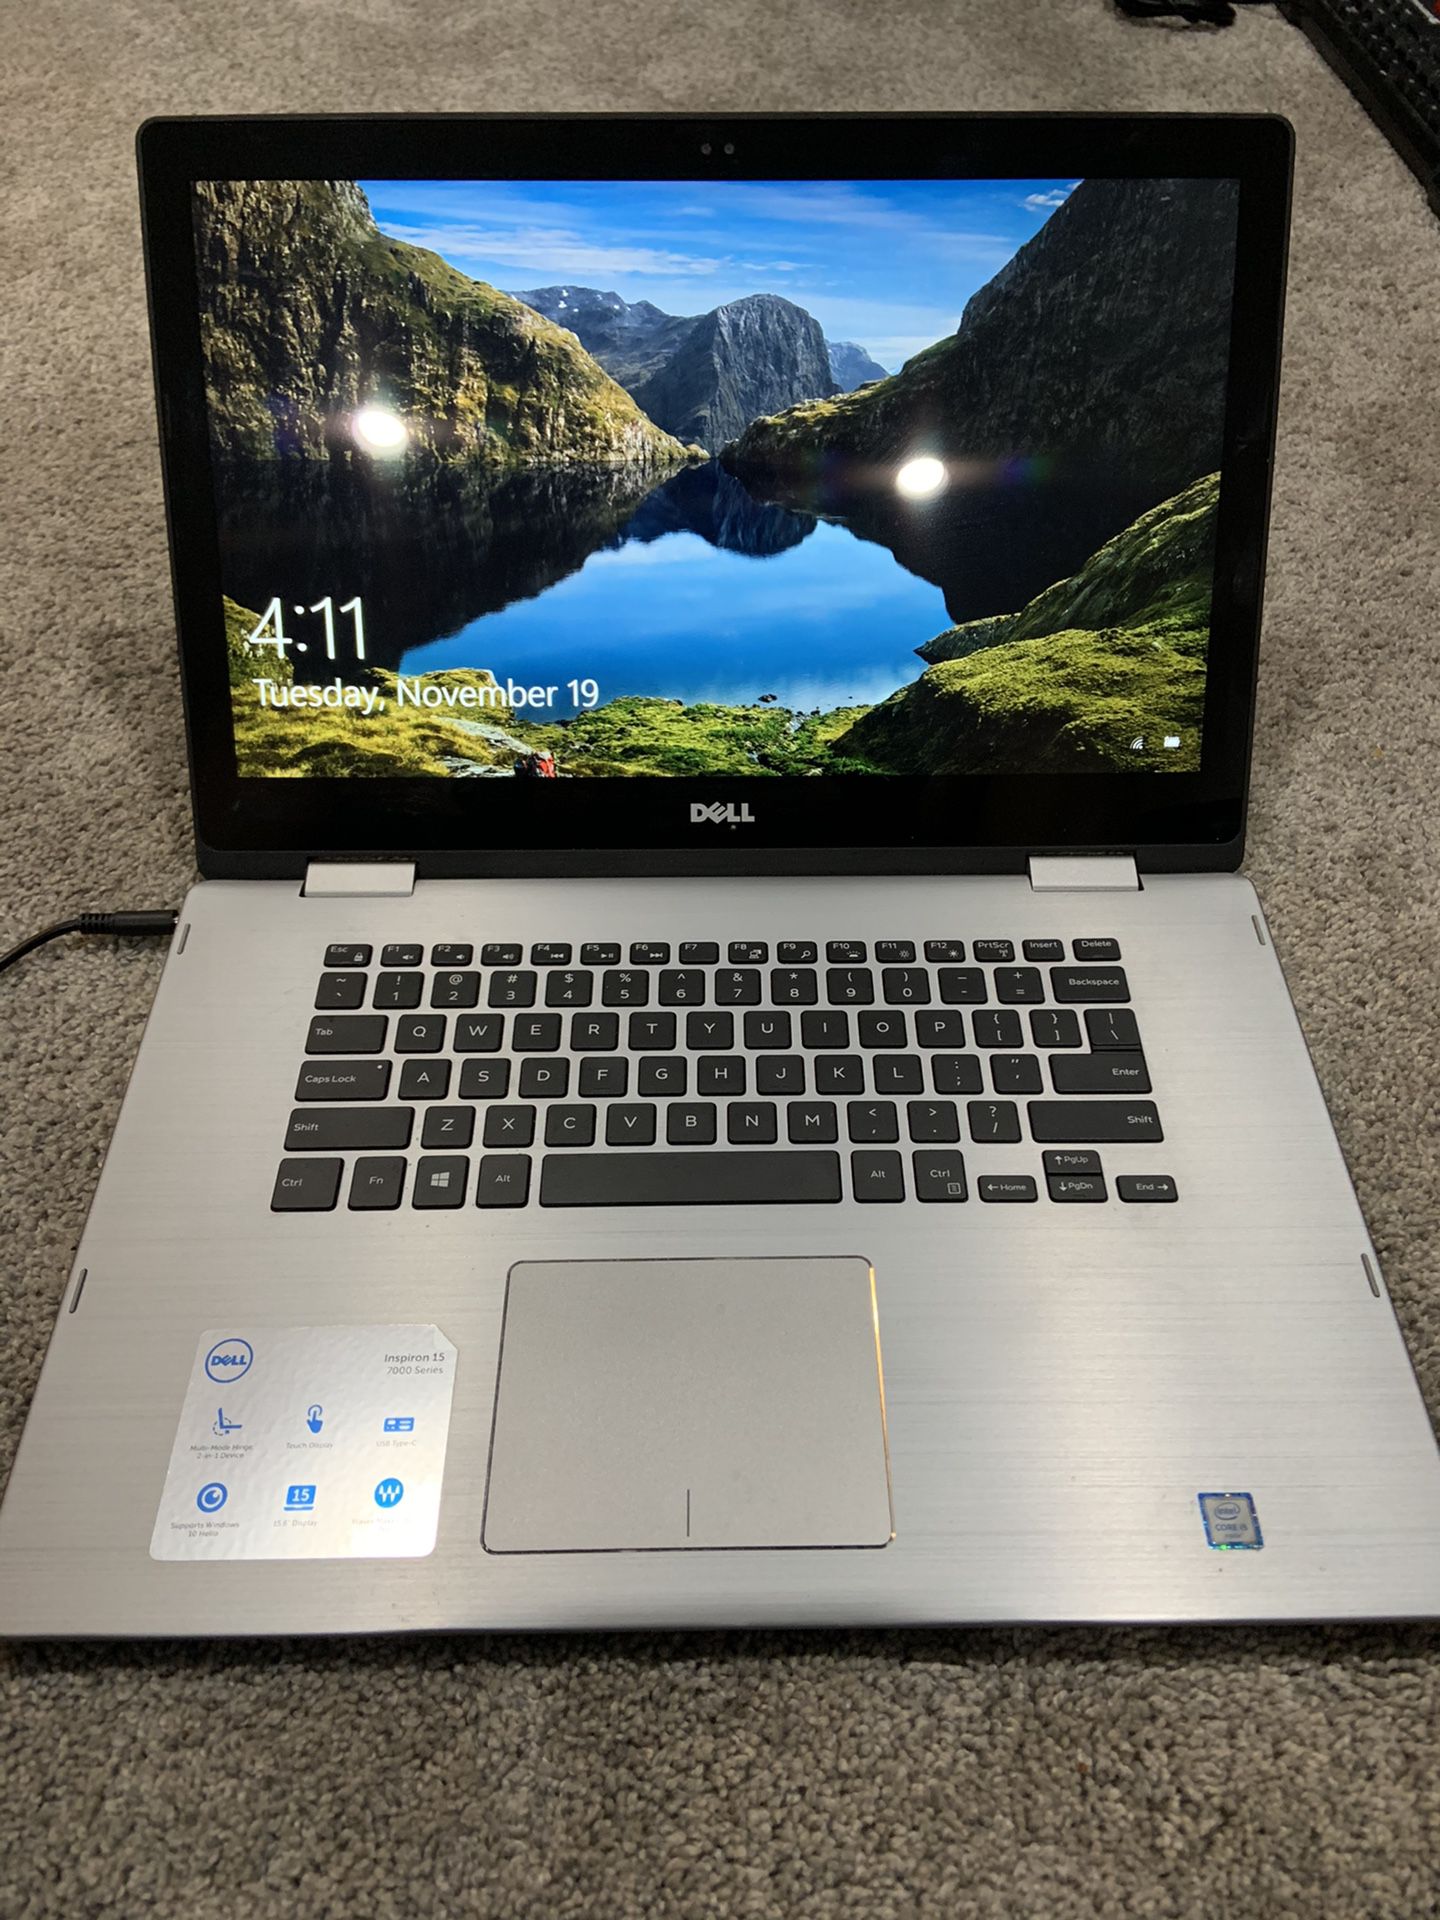 Dell Inspiron 15 7000 Series Laptop